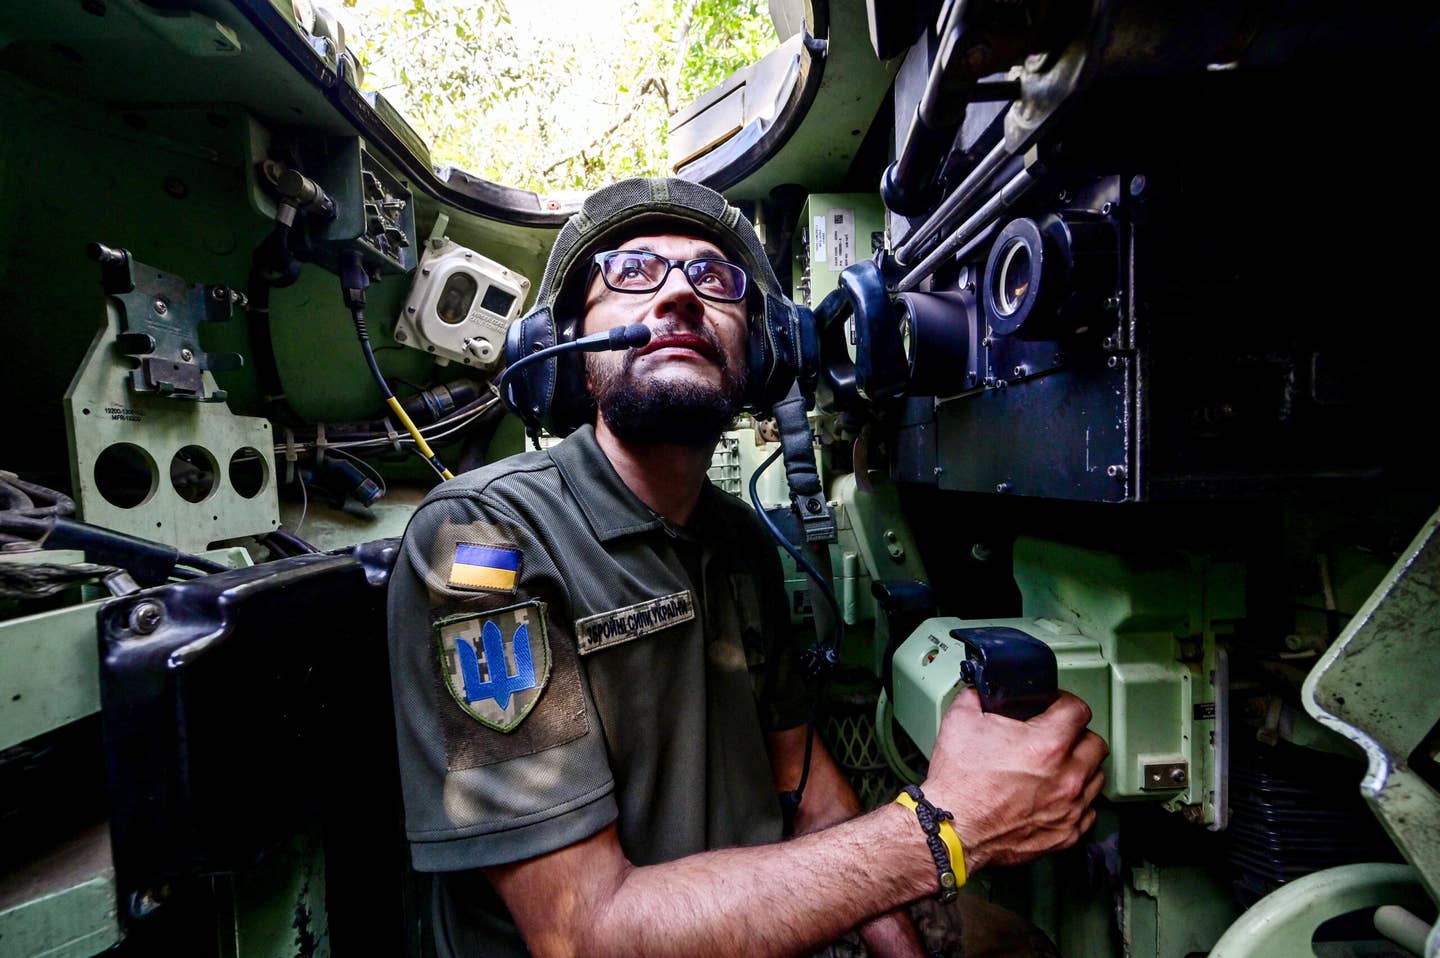 UKRAINE - SEPTEMBER 6, 2023 - Gunner 'Molfar', 39, a Bradley IFV crew member of the 47th Magura Mechanized Brigade who took part in the fighting to liberate Robotyne village from Russian invaders, is pictured inside the vehicle, Zaporizhzhia direction, southeastern Ukraine. (Photo by Ukrinform/NurPhoto via Getty Images)